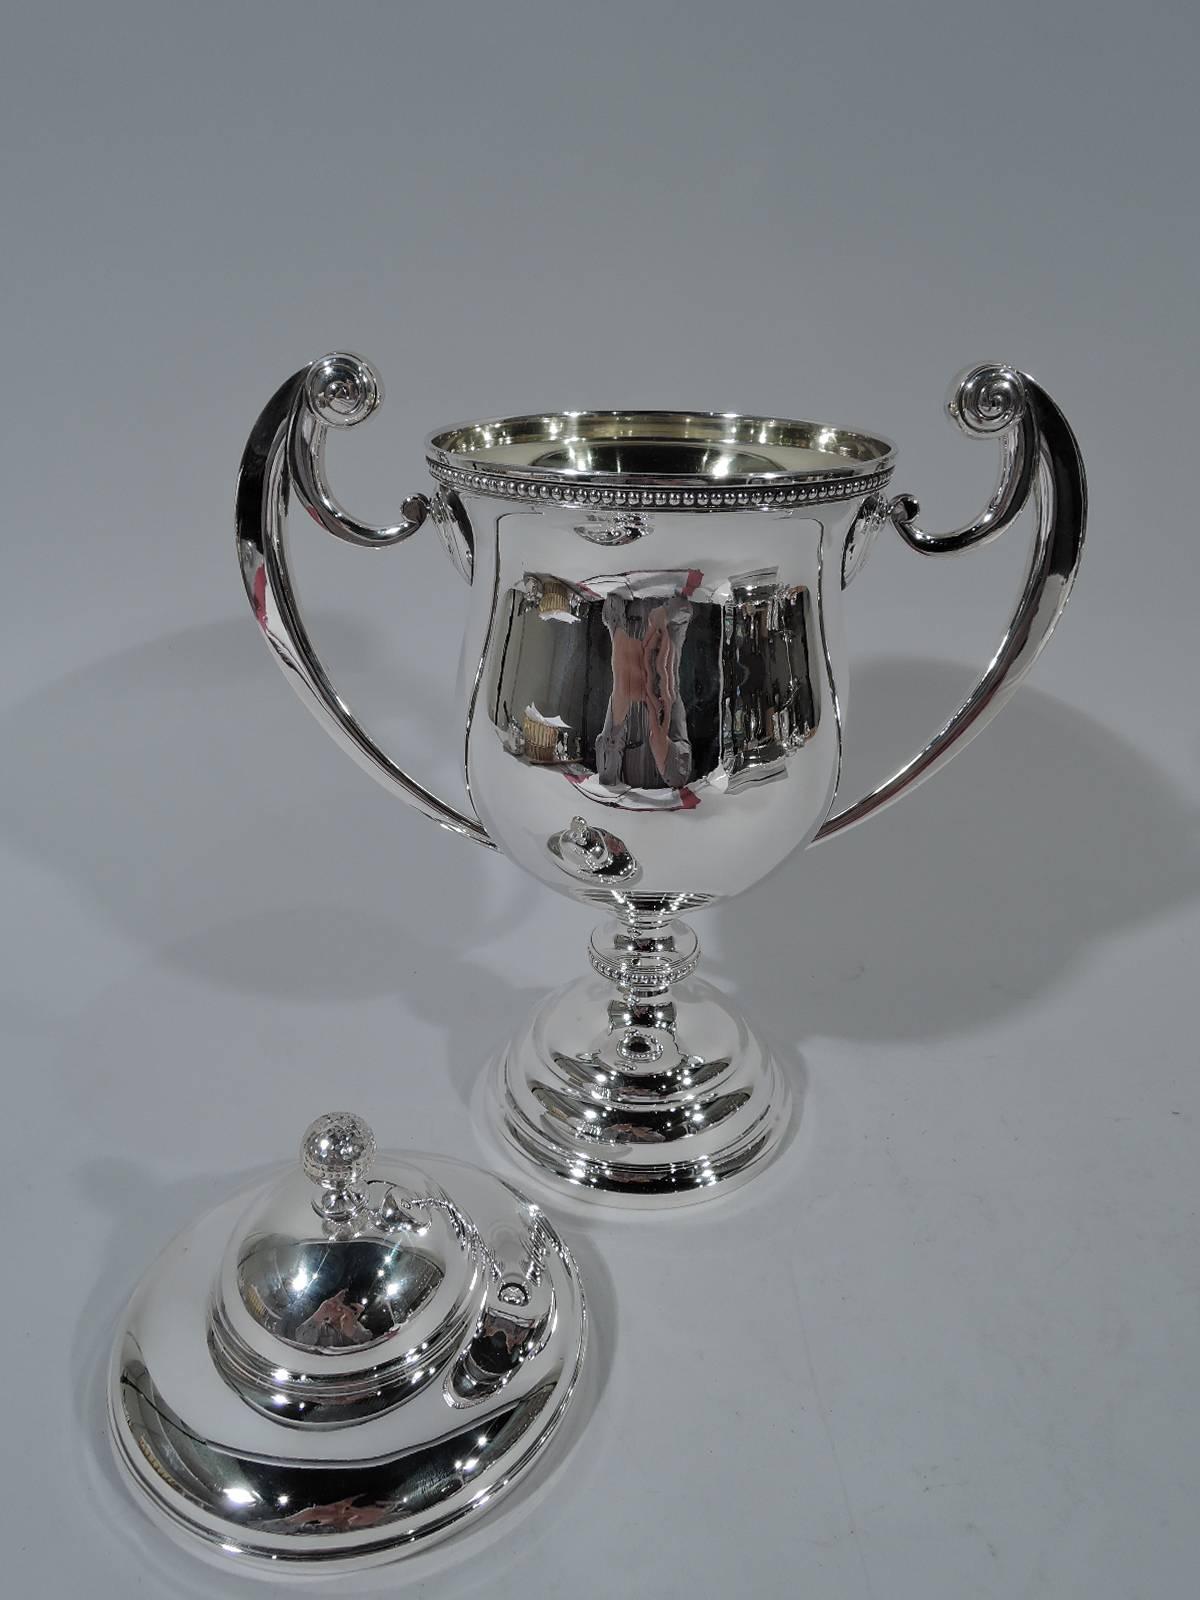 American sterling silver trophy cup, circa 1920. Urn body with beaded rim and knop, flying scroll side handles terminating in volutes, and double-domed foot. Cover also double-domed with golf ball finial. Cup and cover interior gilt. Lots of room